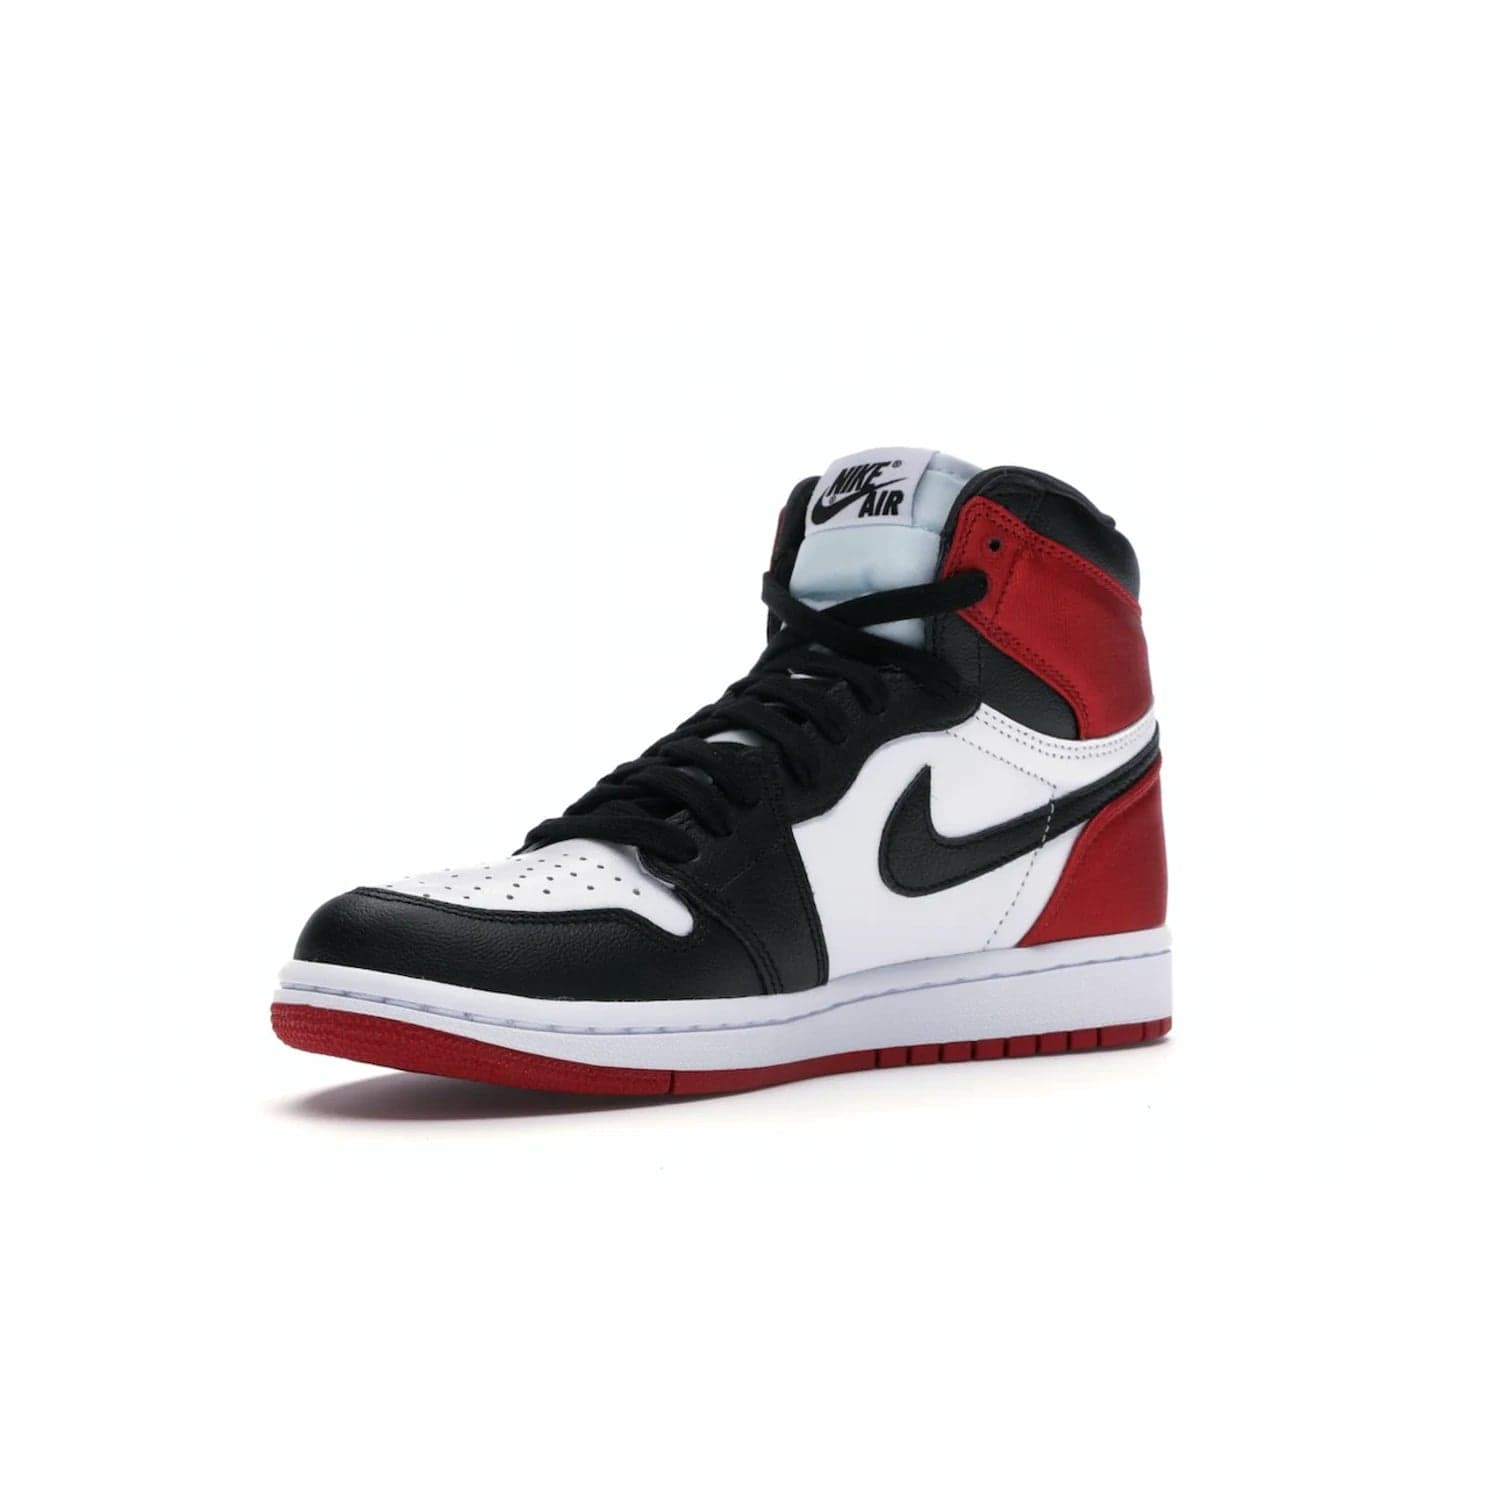 Jordan 1 Retro High Satin Black Toe (Women's) - Image 15 - Only at www.BallersClubKickz.com - Luxurious take on the timeless Air Jordan 1. Features a mix of black leather and satin materials with subtle University Red accents. Elevated look with metal Wings logo on the heel. Released in August 2019.